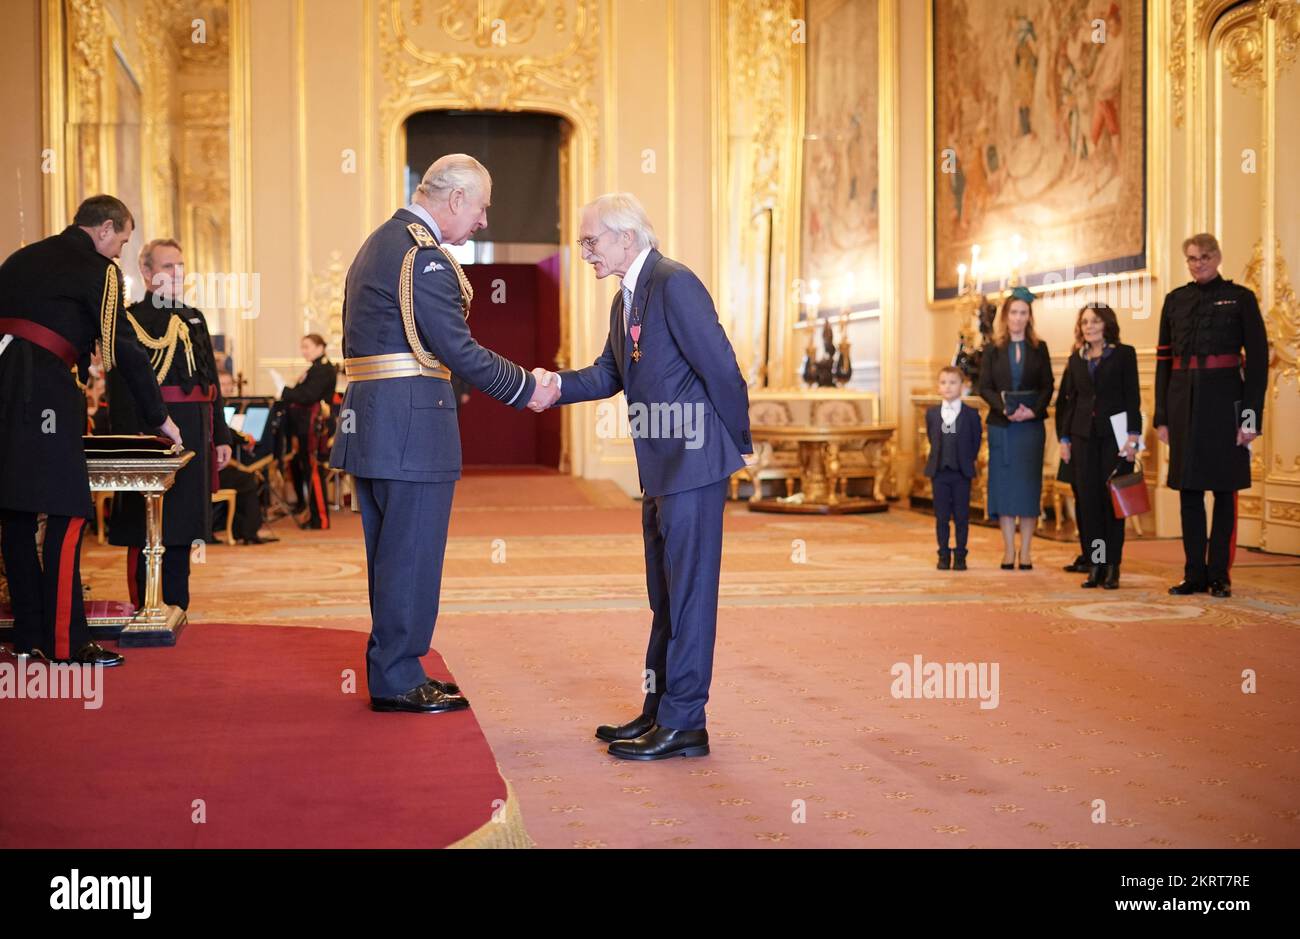 Simon Wain-Hobson, Professor of Molecular Retrovirology at the Pasteur Institute in Paris, is made an Officer of the Order of the British Empire by King Charles III at Windsor Castle. The award was for services to virology. Picture date: Tuesday November 29, 2022. Stock Photo